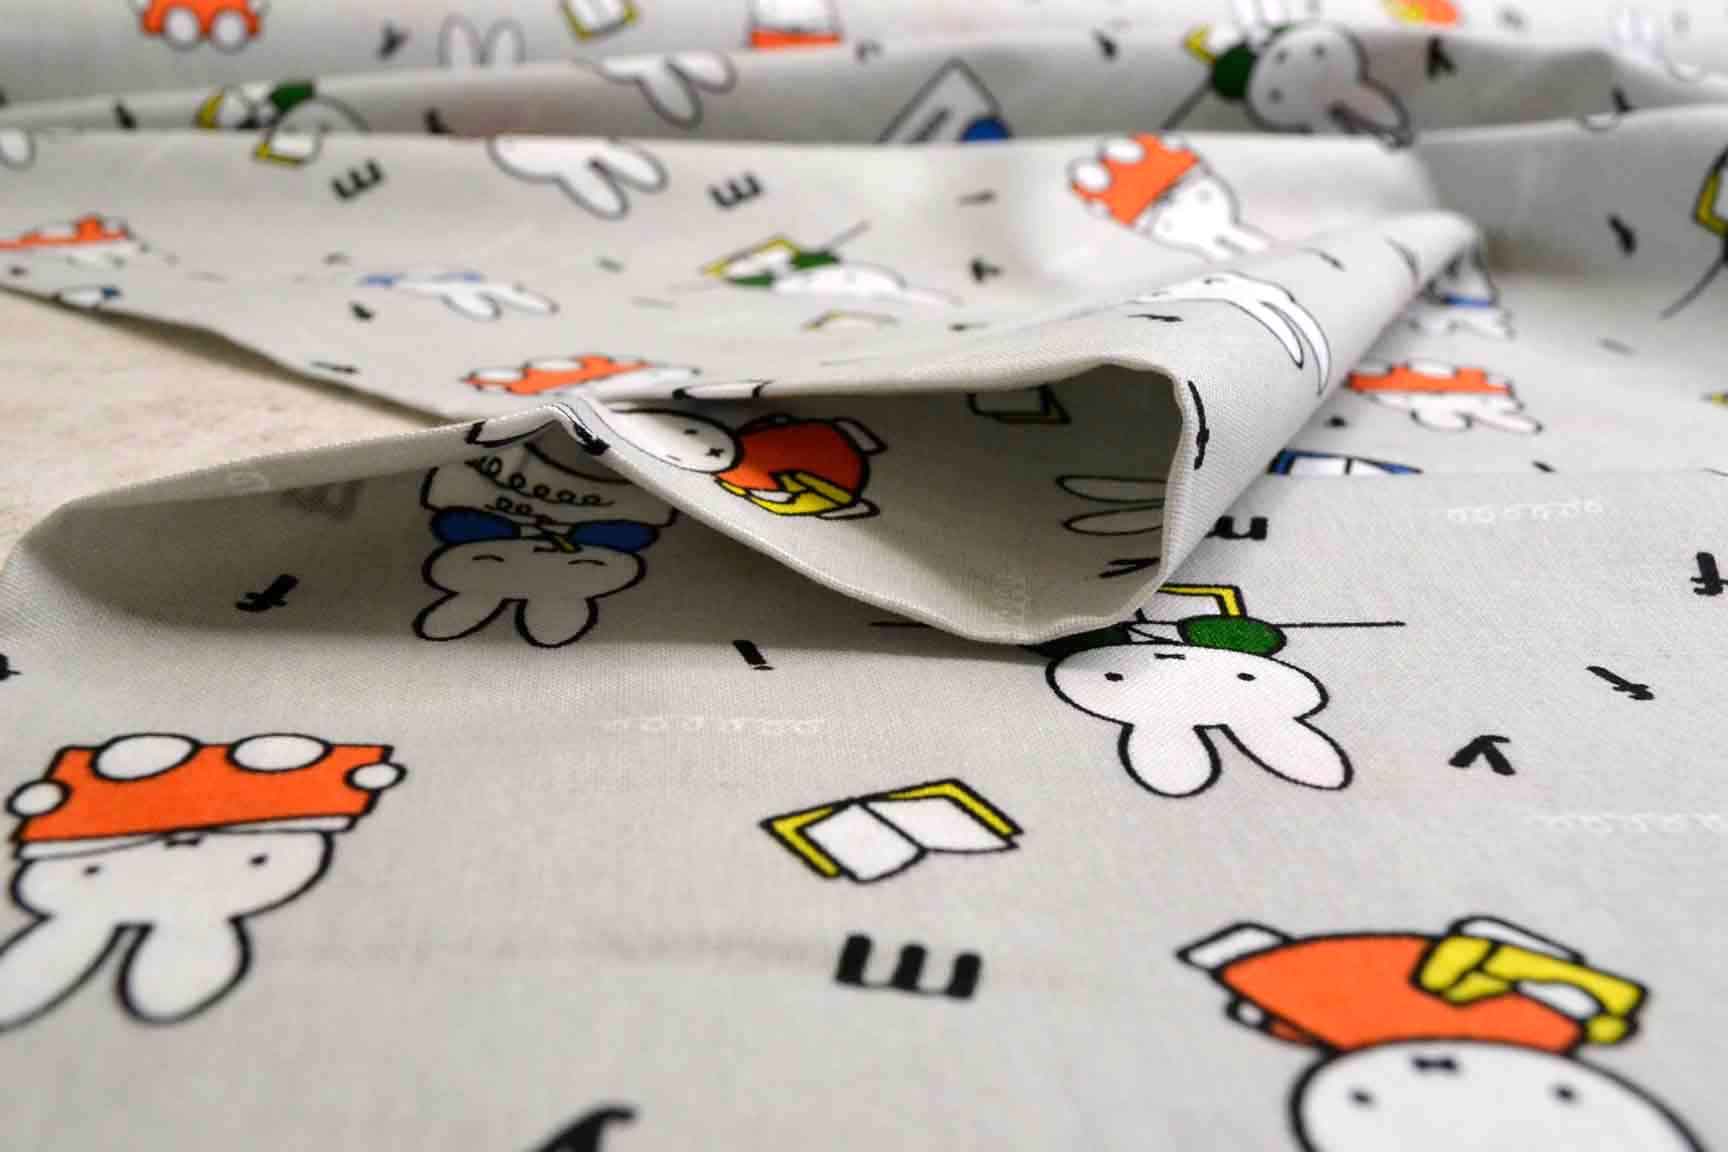 Miffy at School Grey, Craft Cotton Co